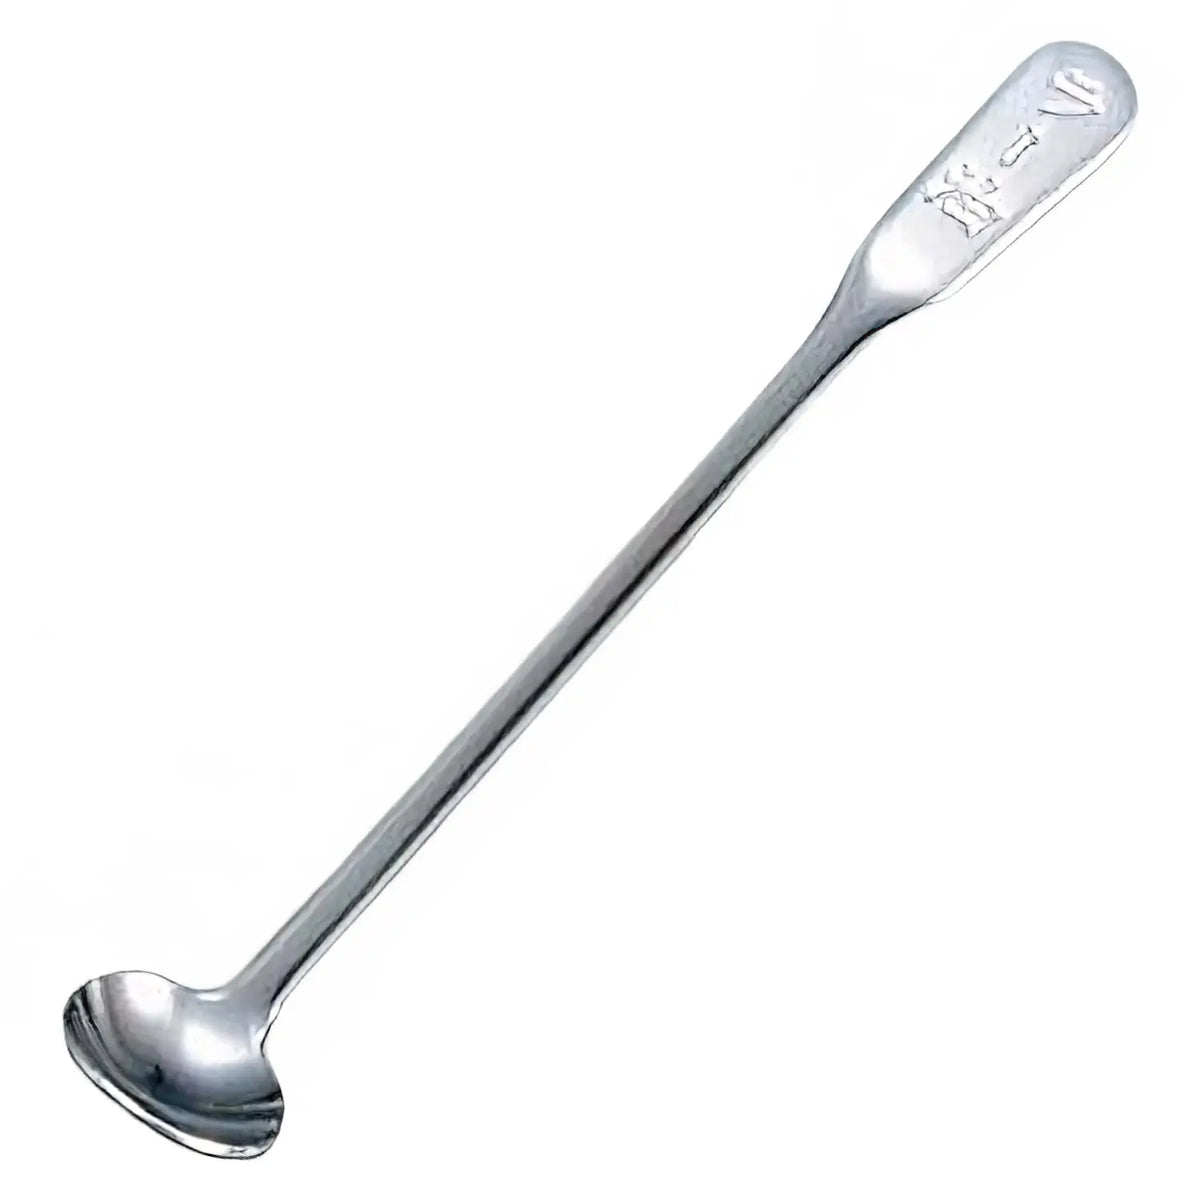 EBM Stainless Steel Chili Oil Spoon